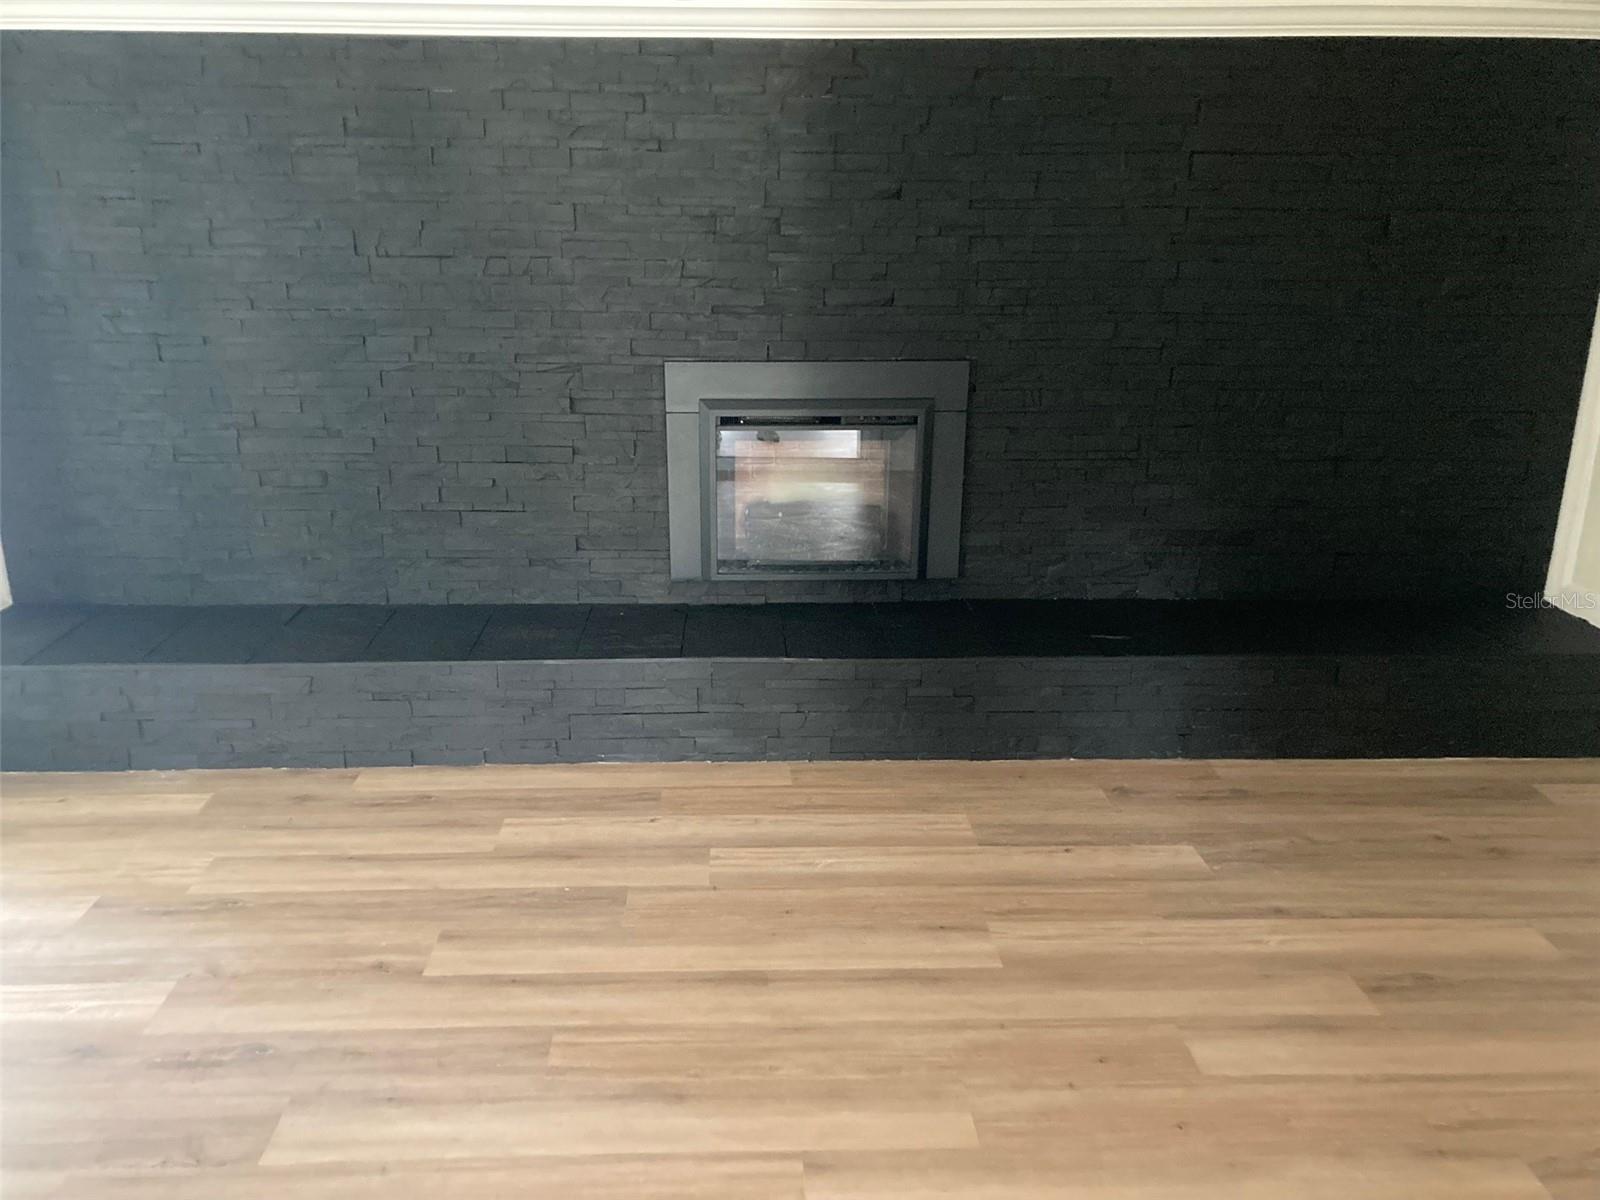 FIREPLACE IN FAMILY ROOM